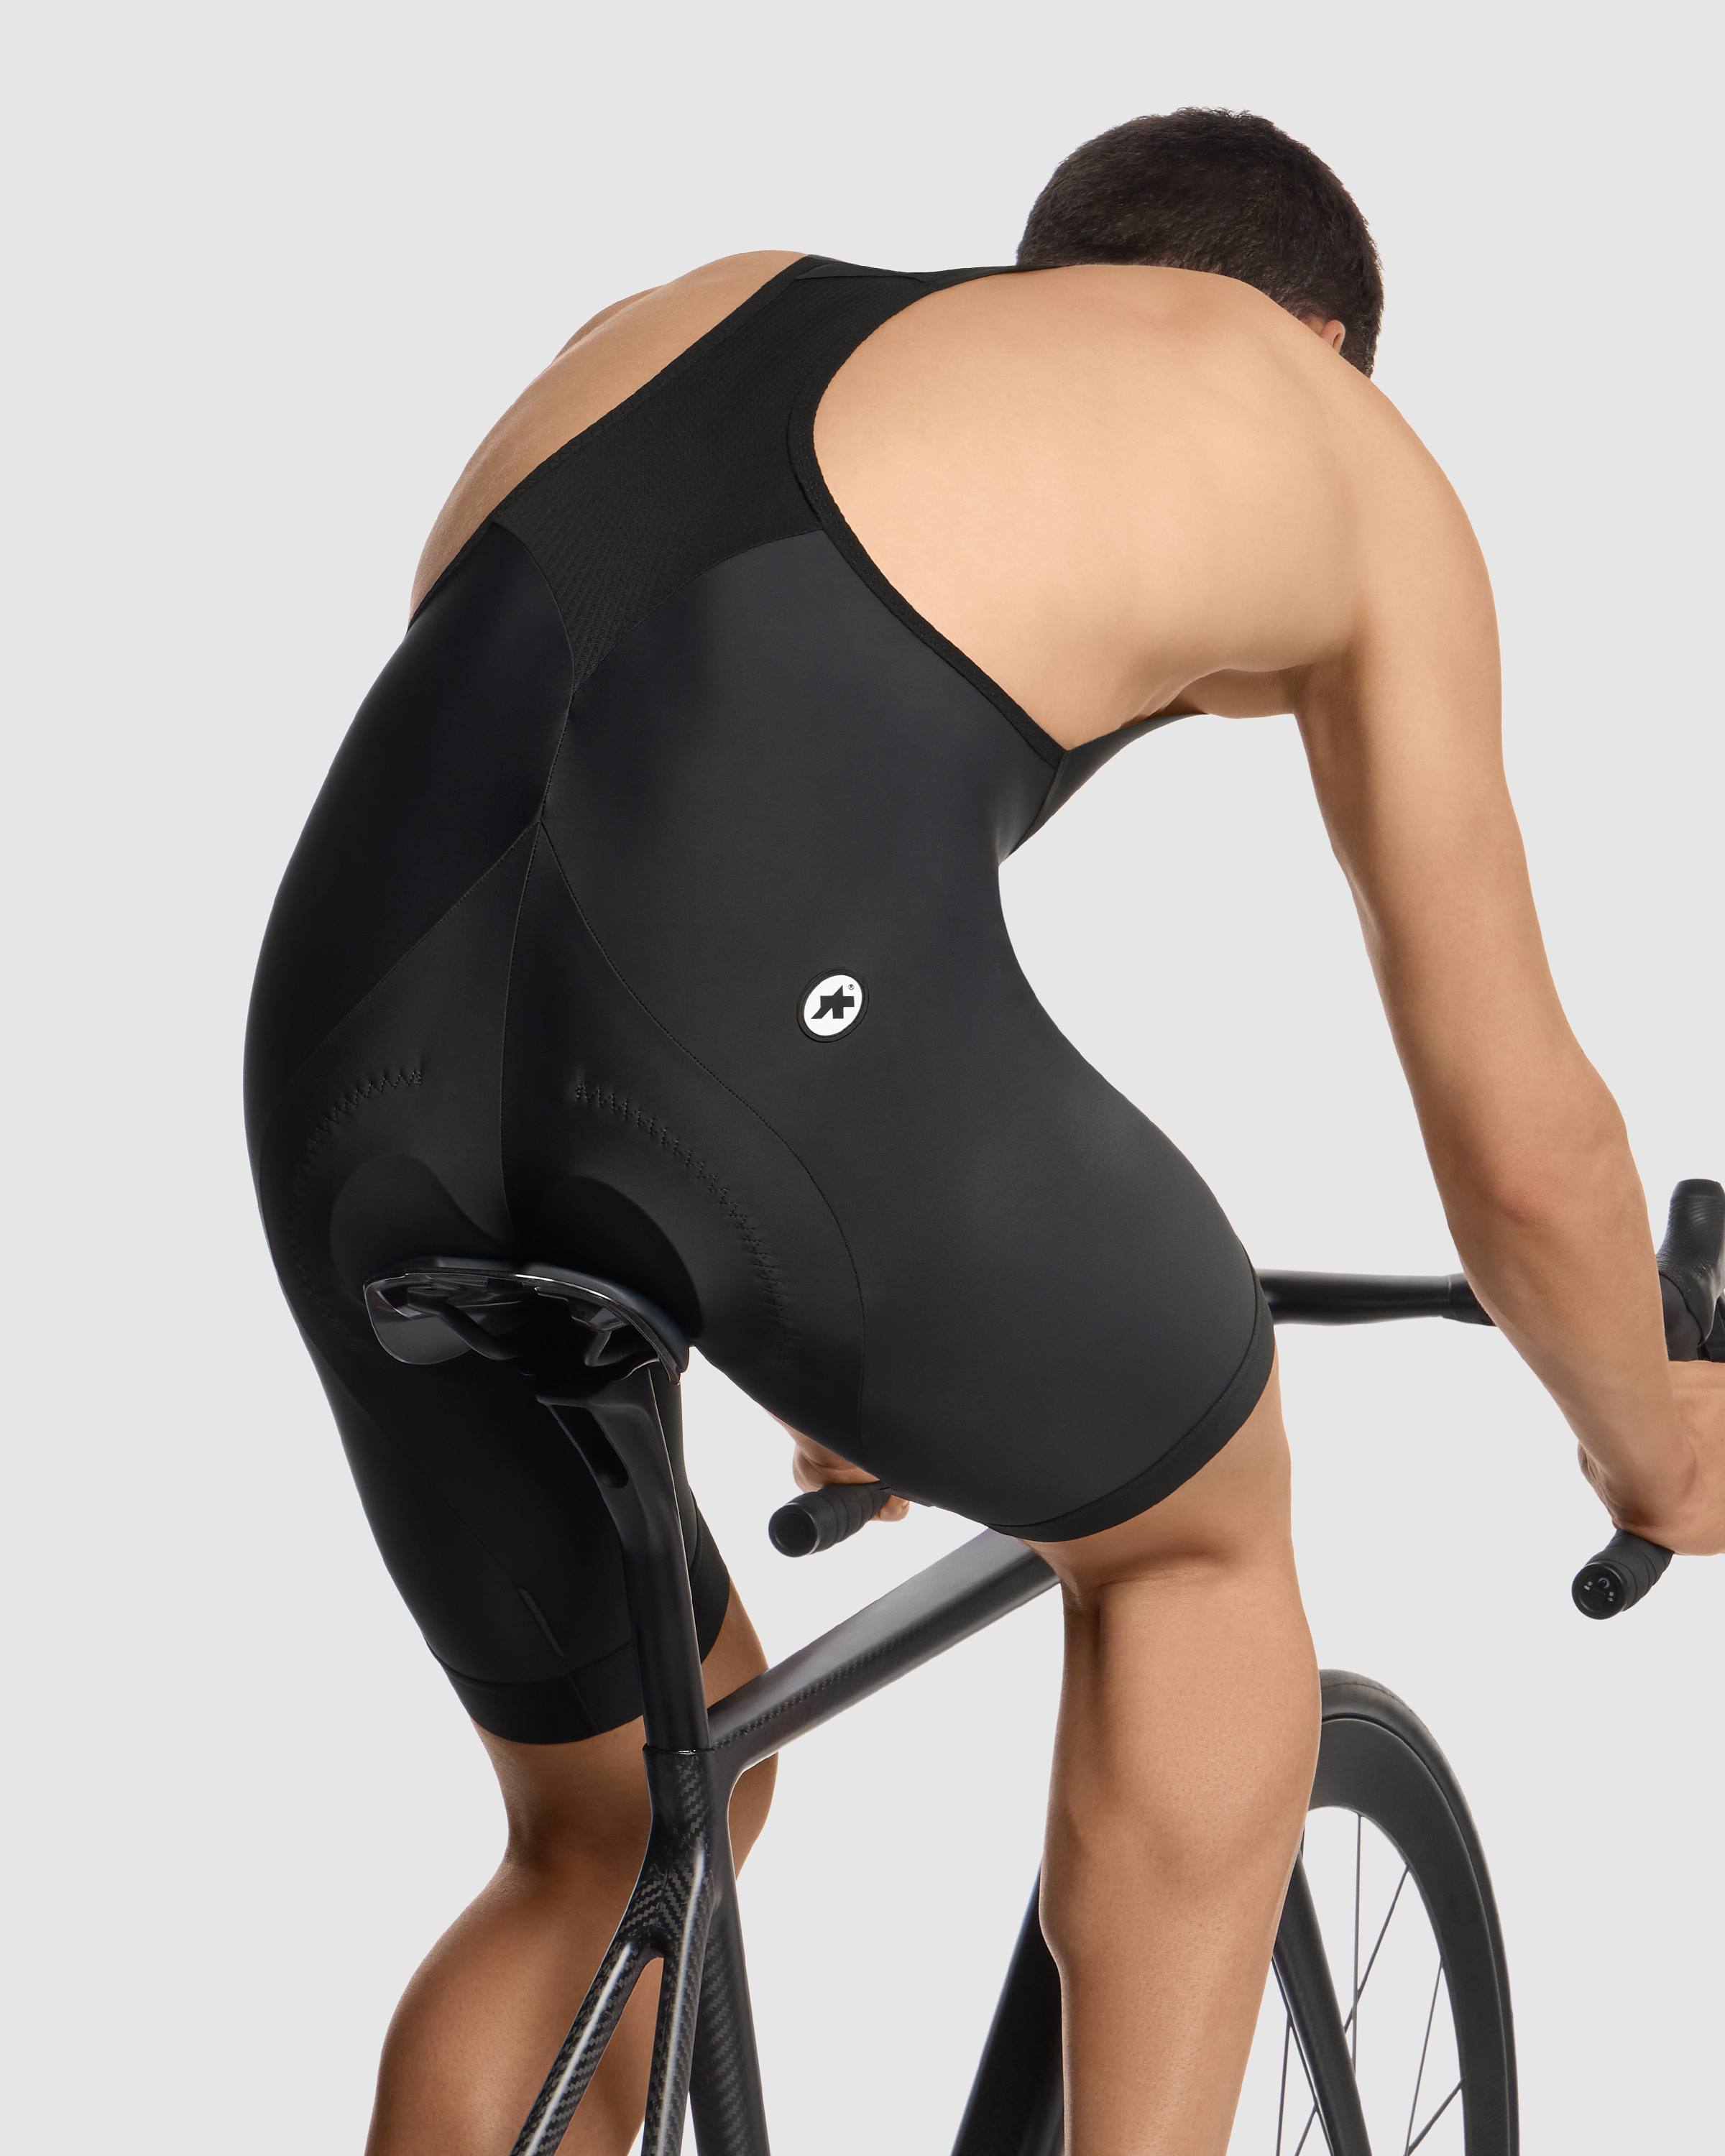 REFORM BIB SHORTS P1 - ASSOS Of Switzerland - Official Outlet